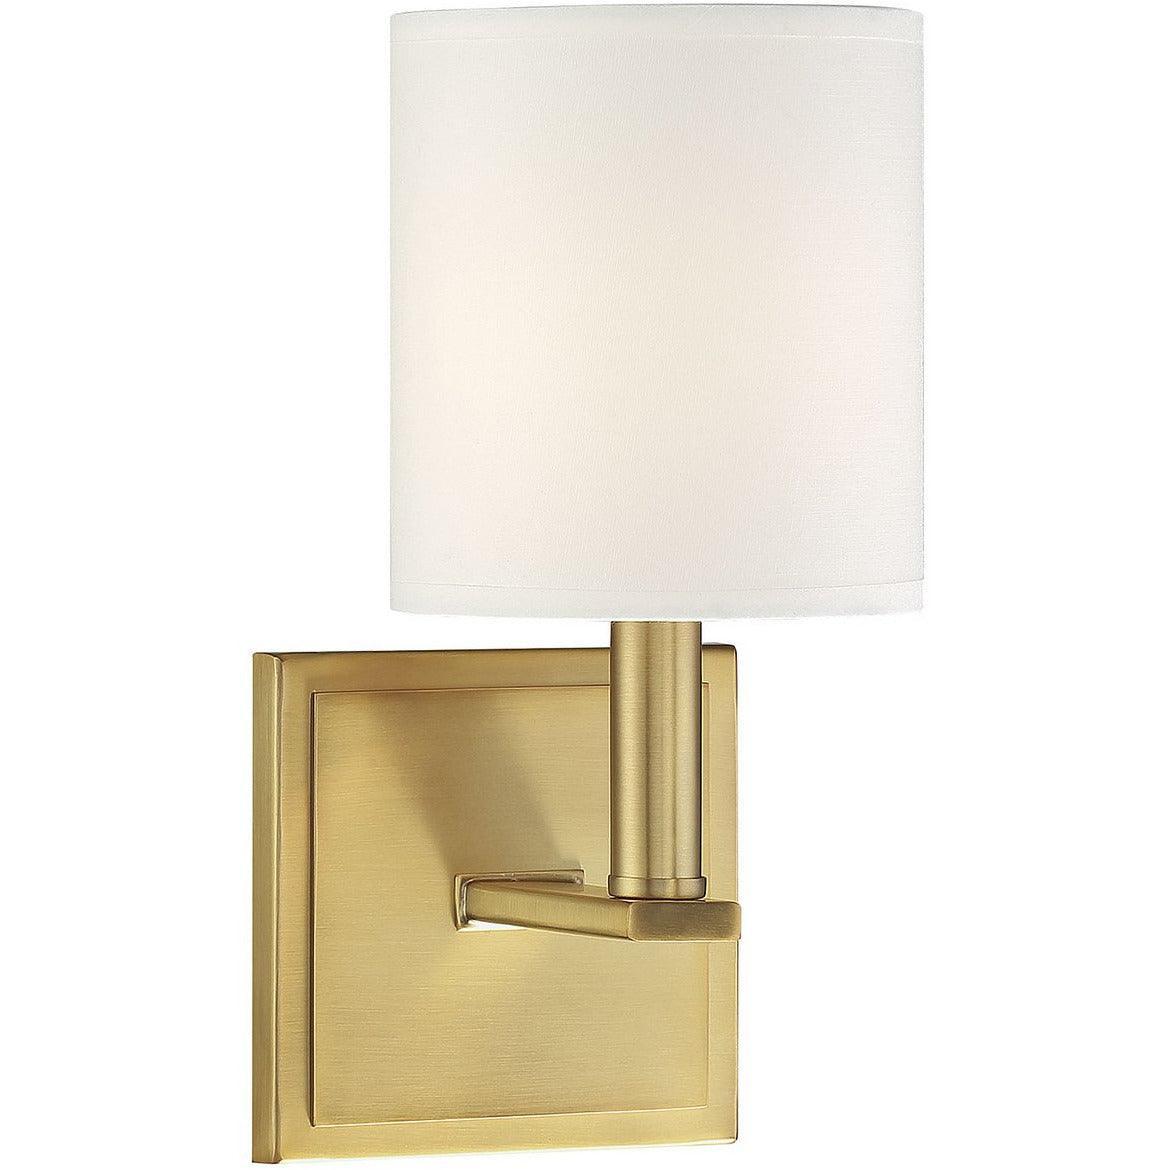 Savoy House - Waverly One Light Wall Sconce - 9-1200-1-322 | Montreal Lighting & Hardware